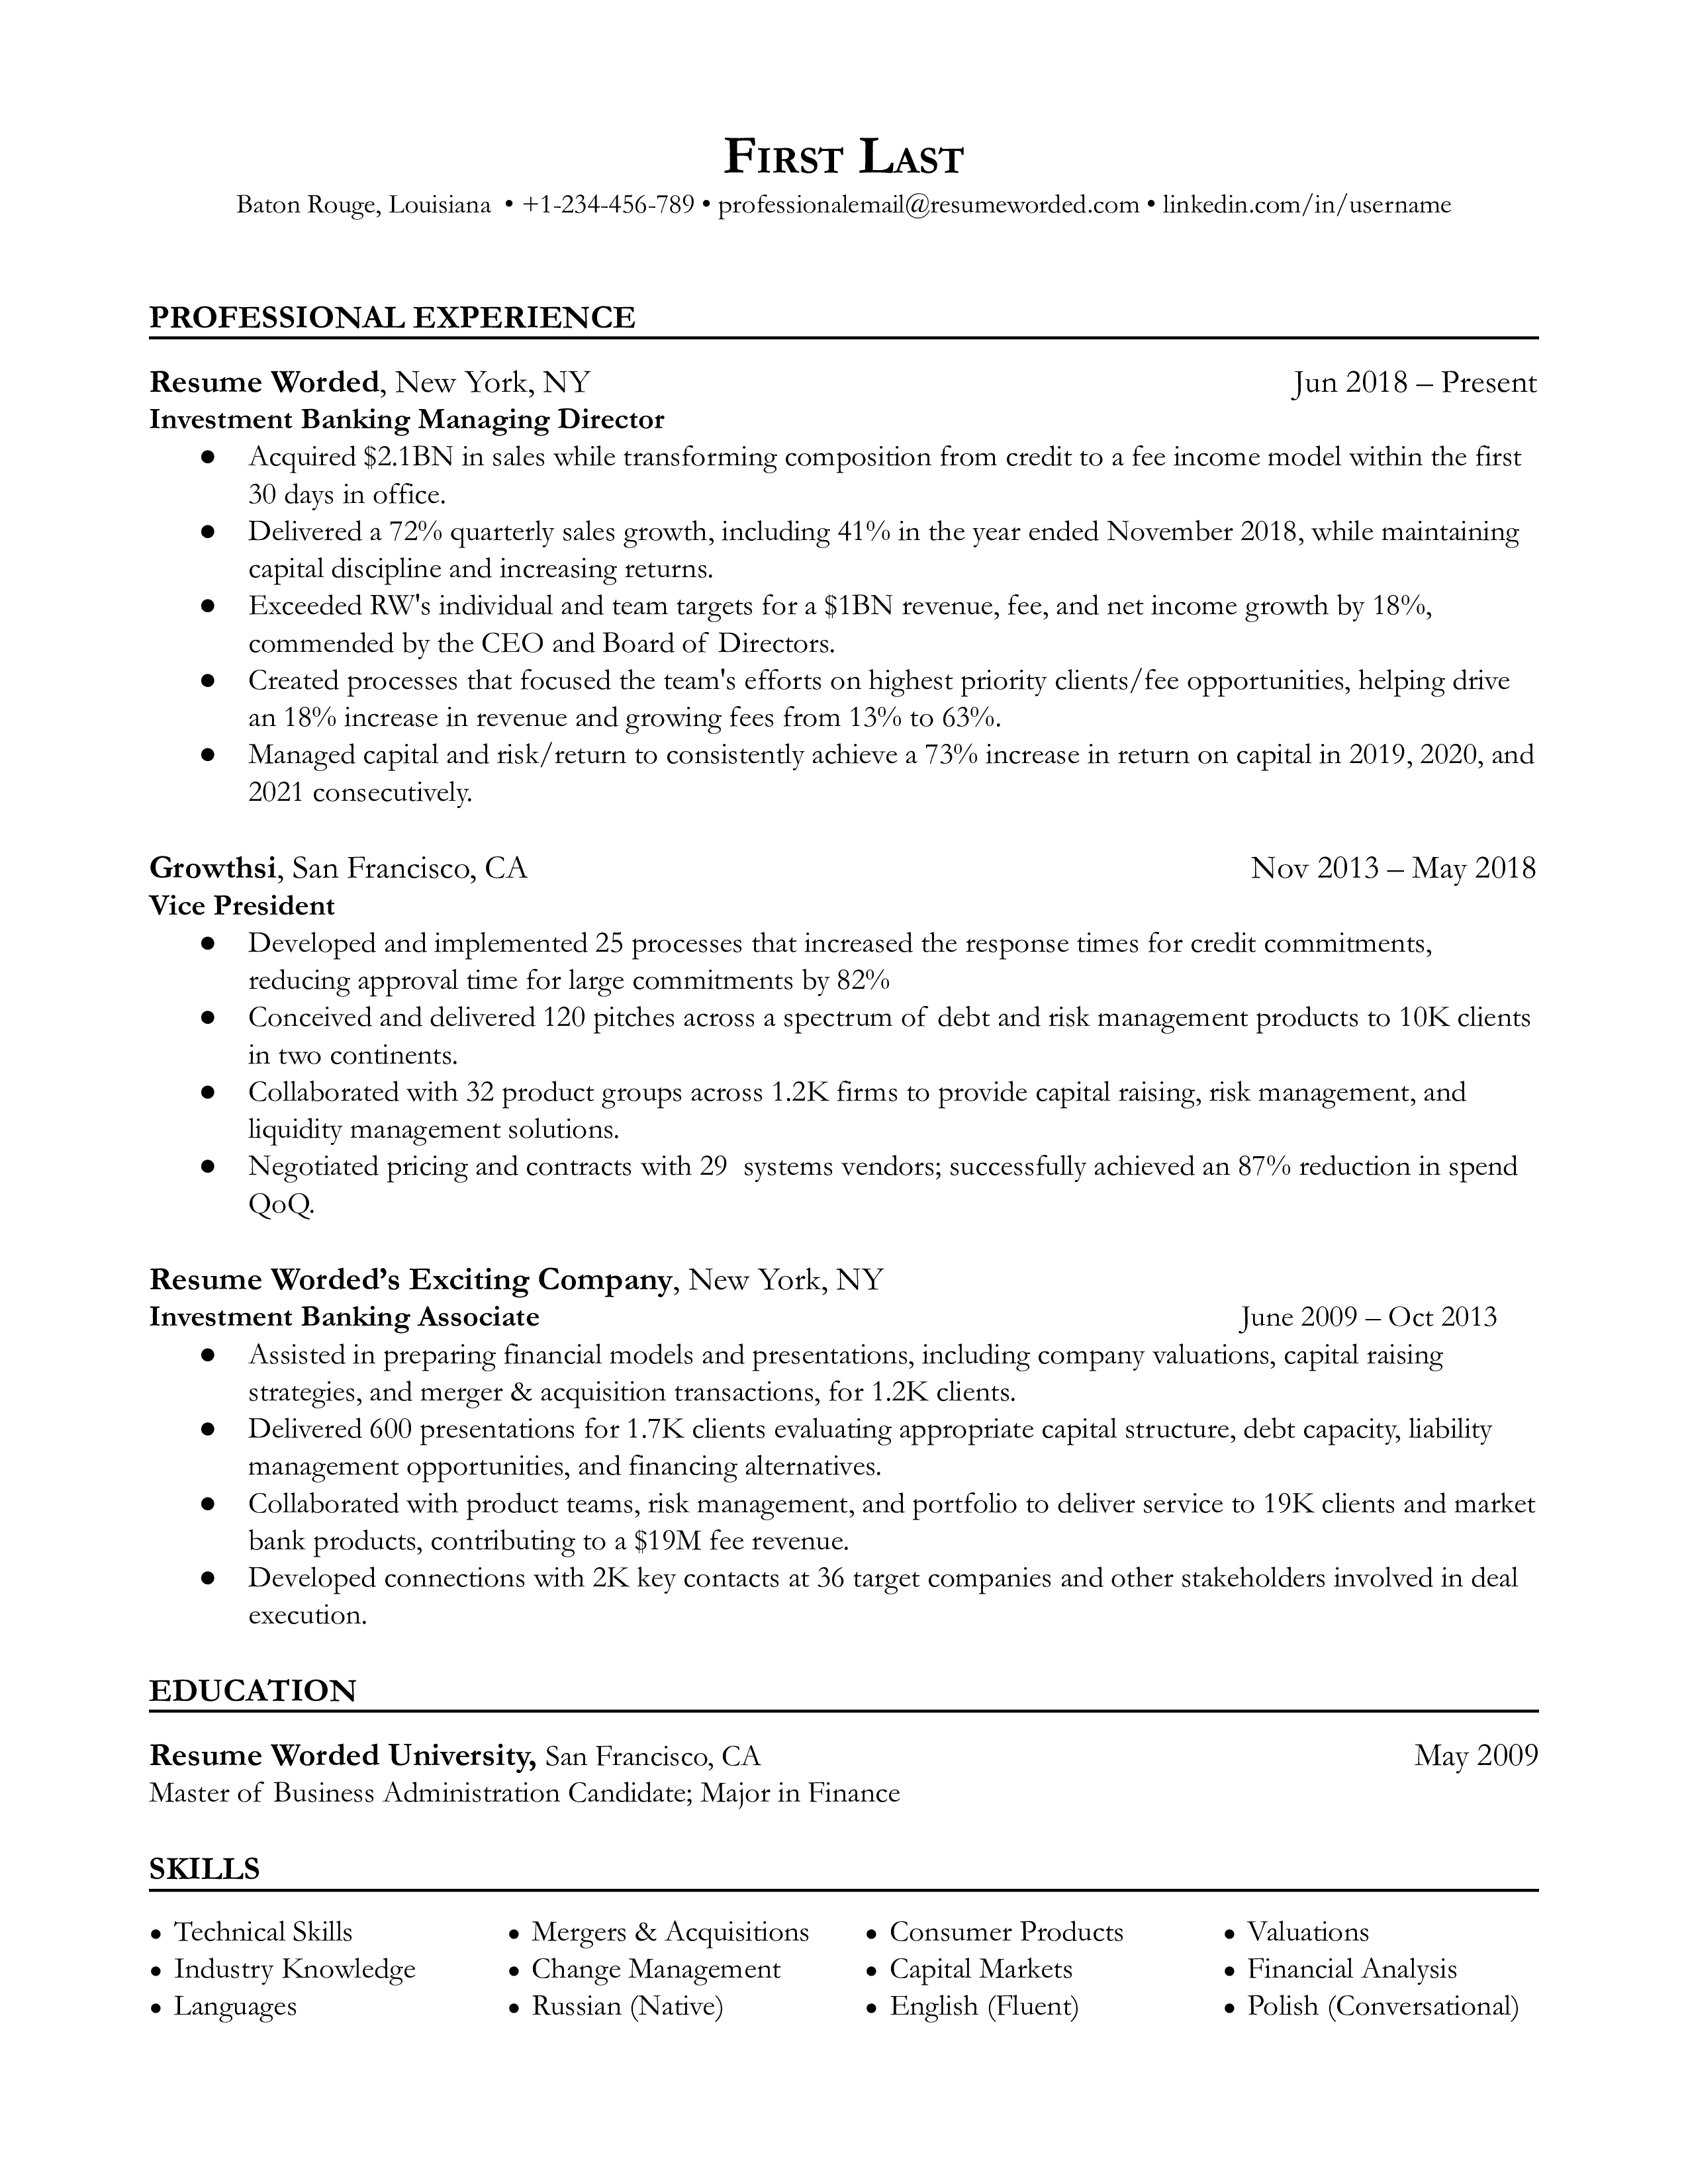 Snapshot of a CV highlighting deal-making and leadership experience for an Investment Banking Managing Director role.